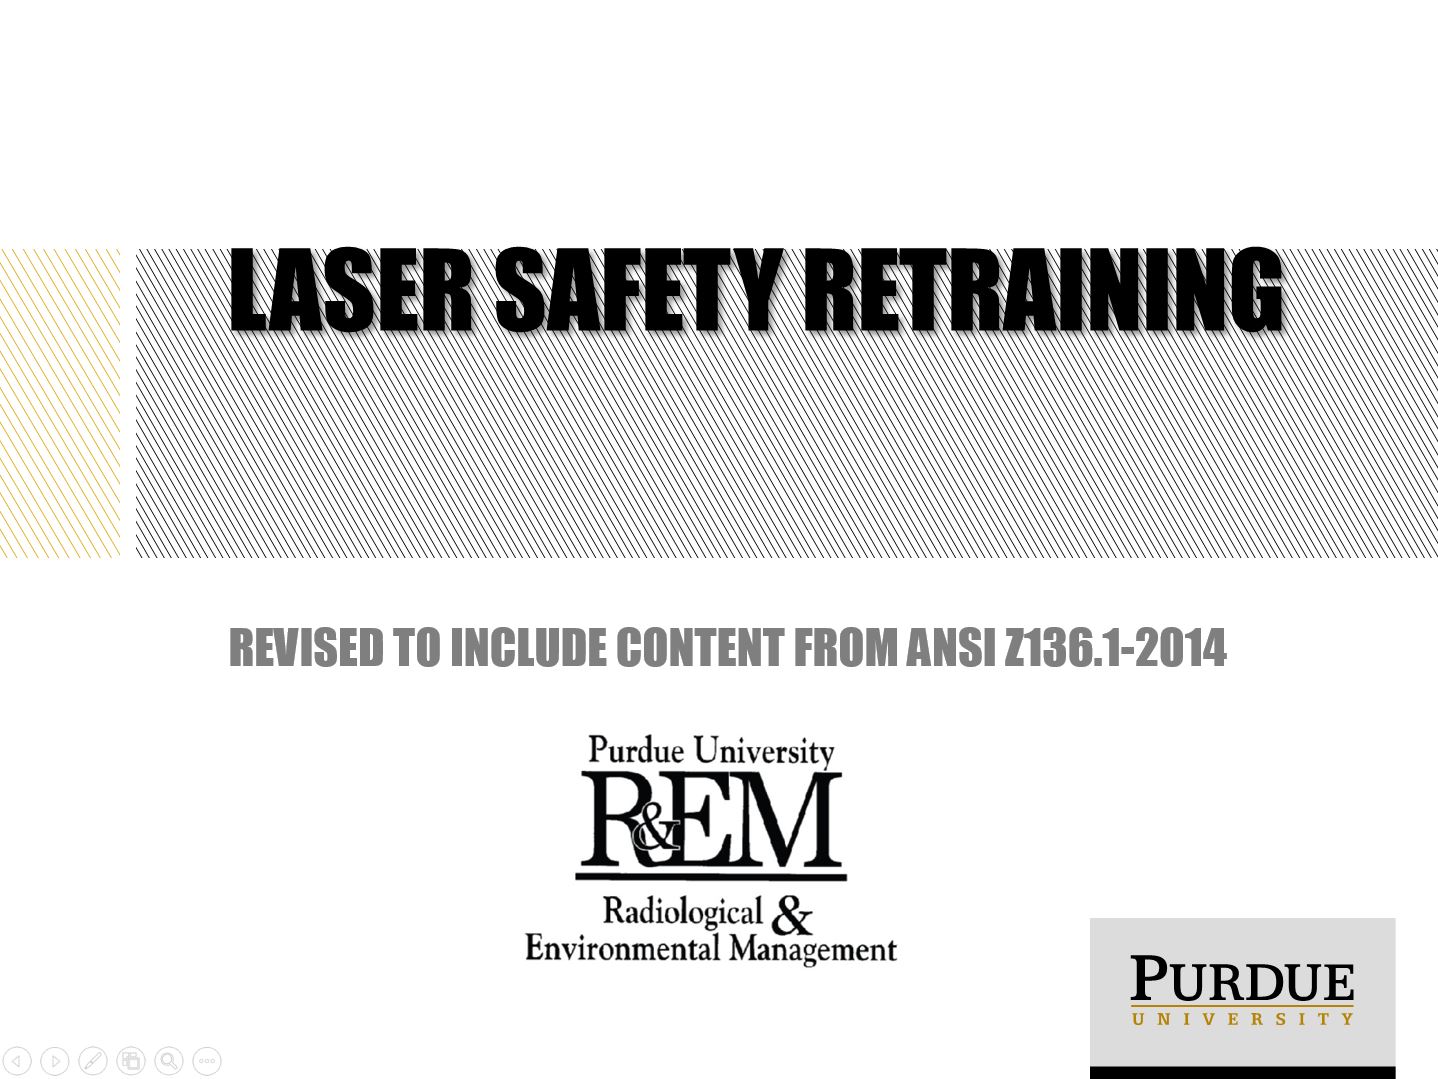 lasers classes 3B and 4 -refresher